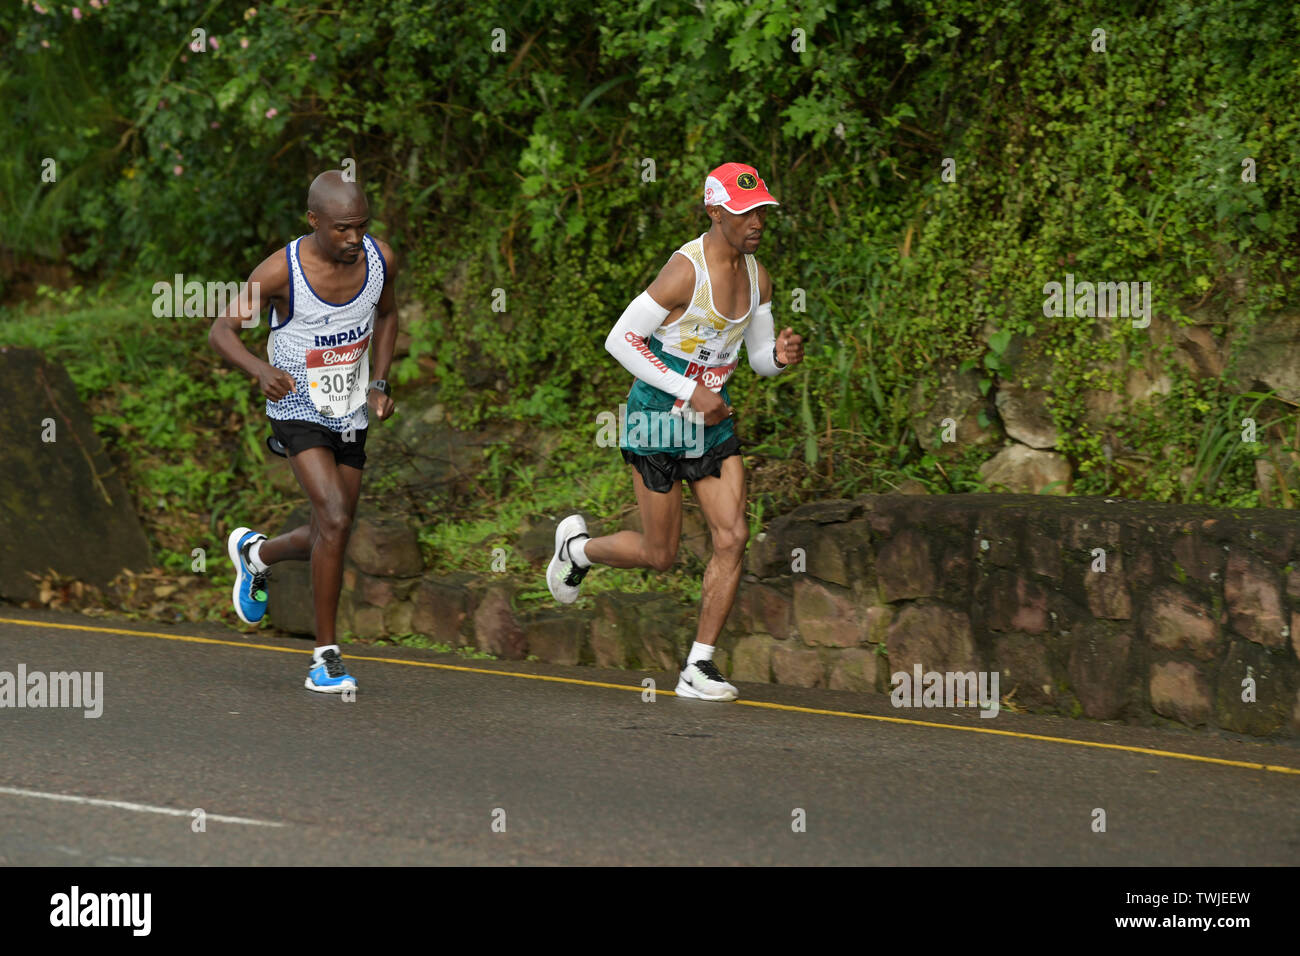 Durban, South Africa, 2 adult male elite athletes running in 2019 Comrades Marathon race, competition, sport, people, runners Stock Photo